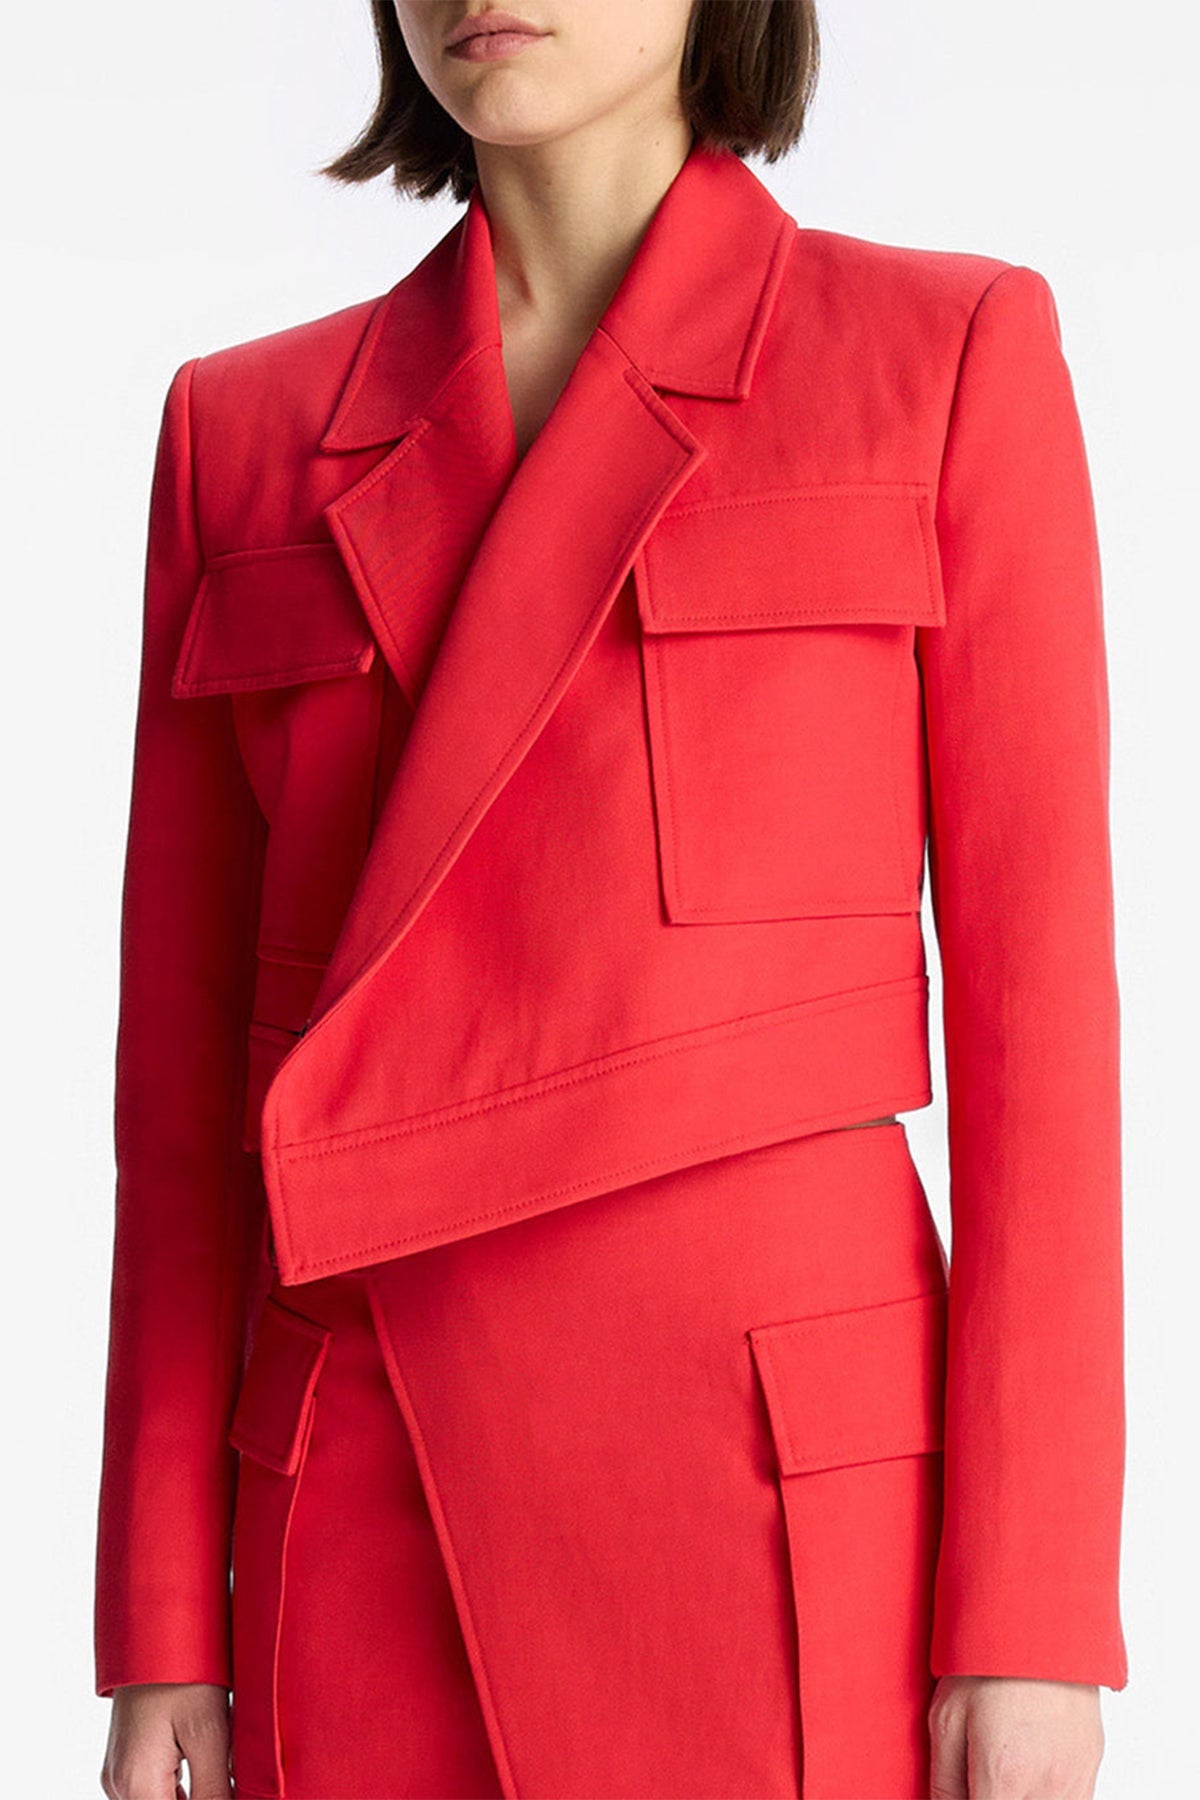 Reeve Cropped Jacket in Ruby - shop-olivia.com